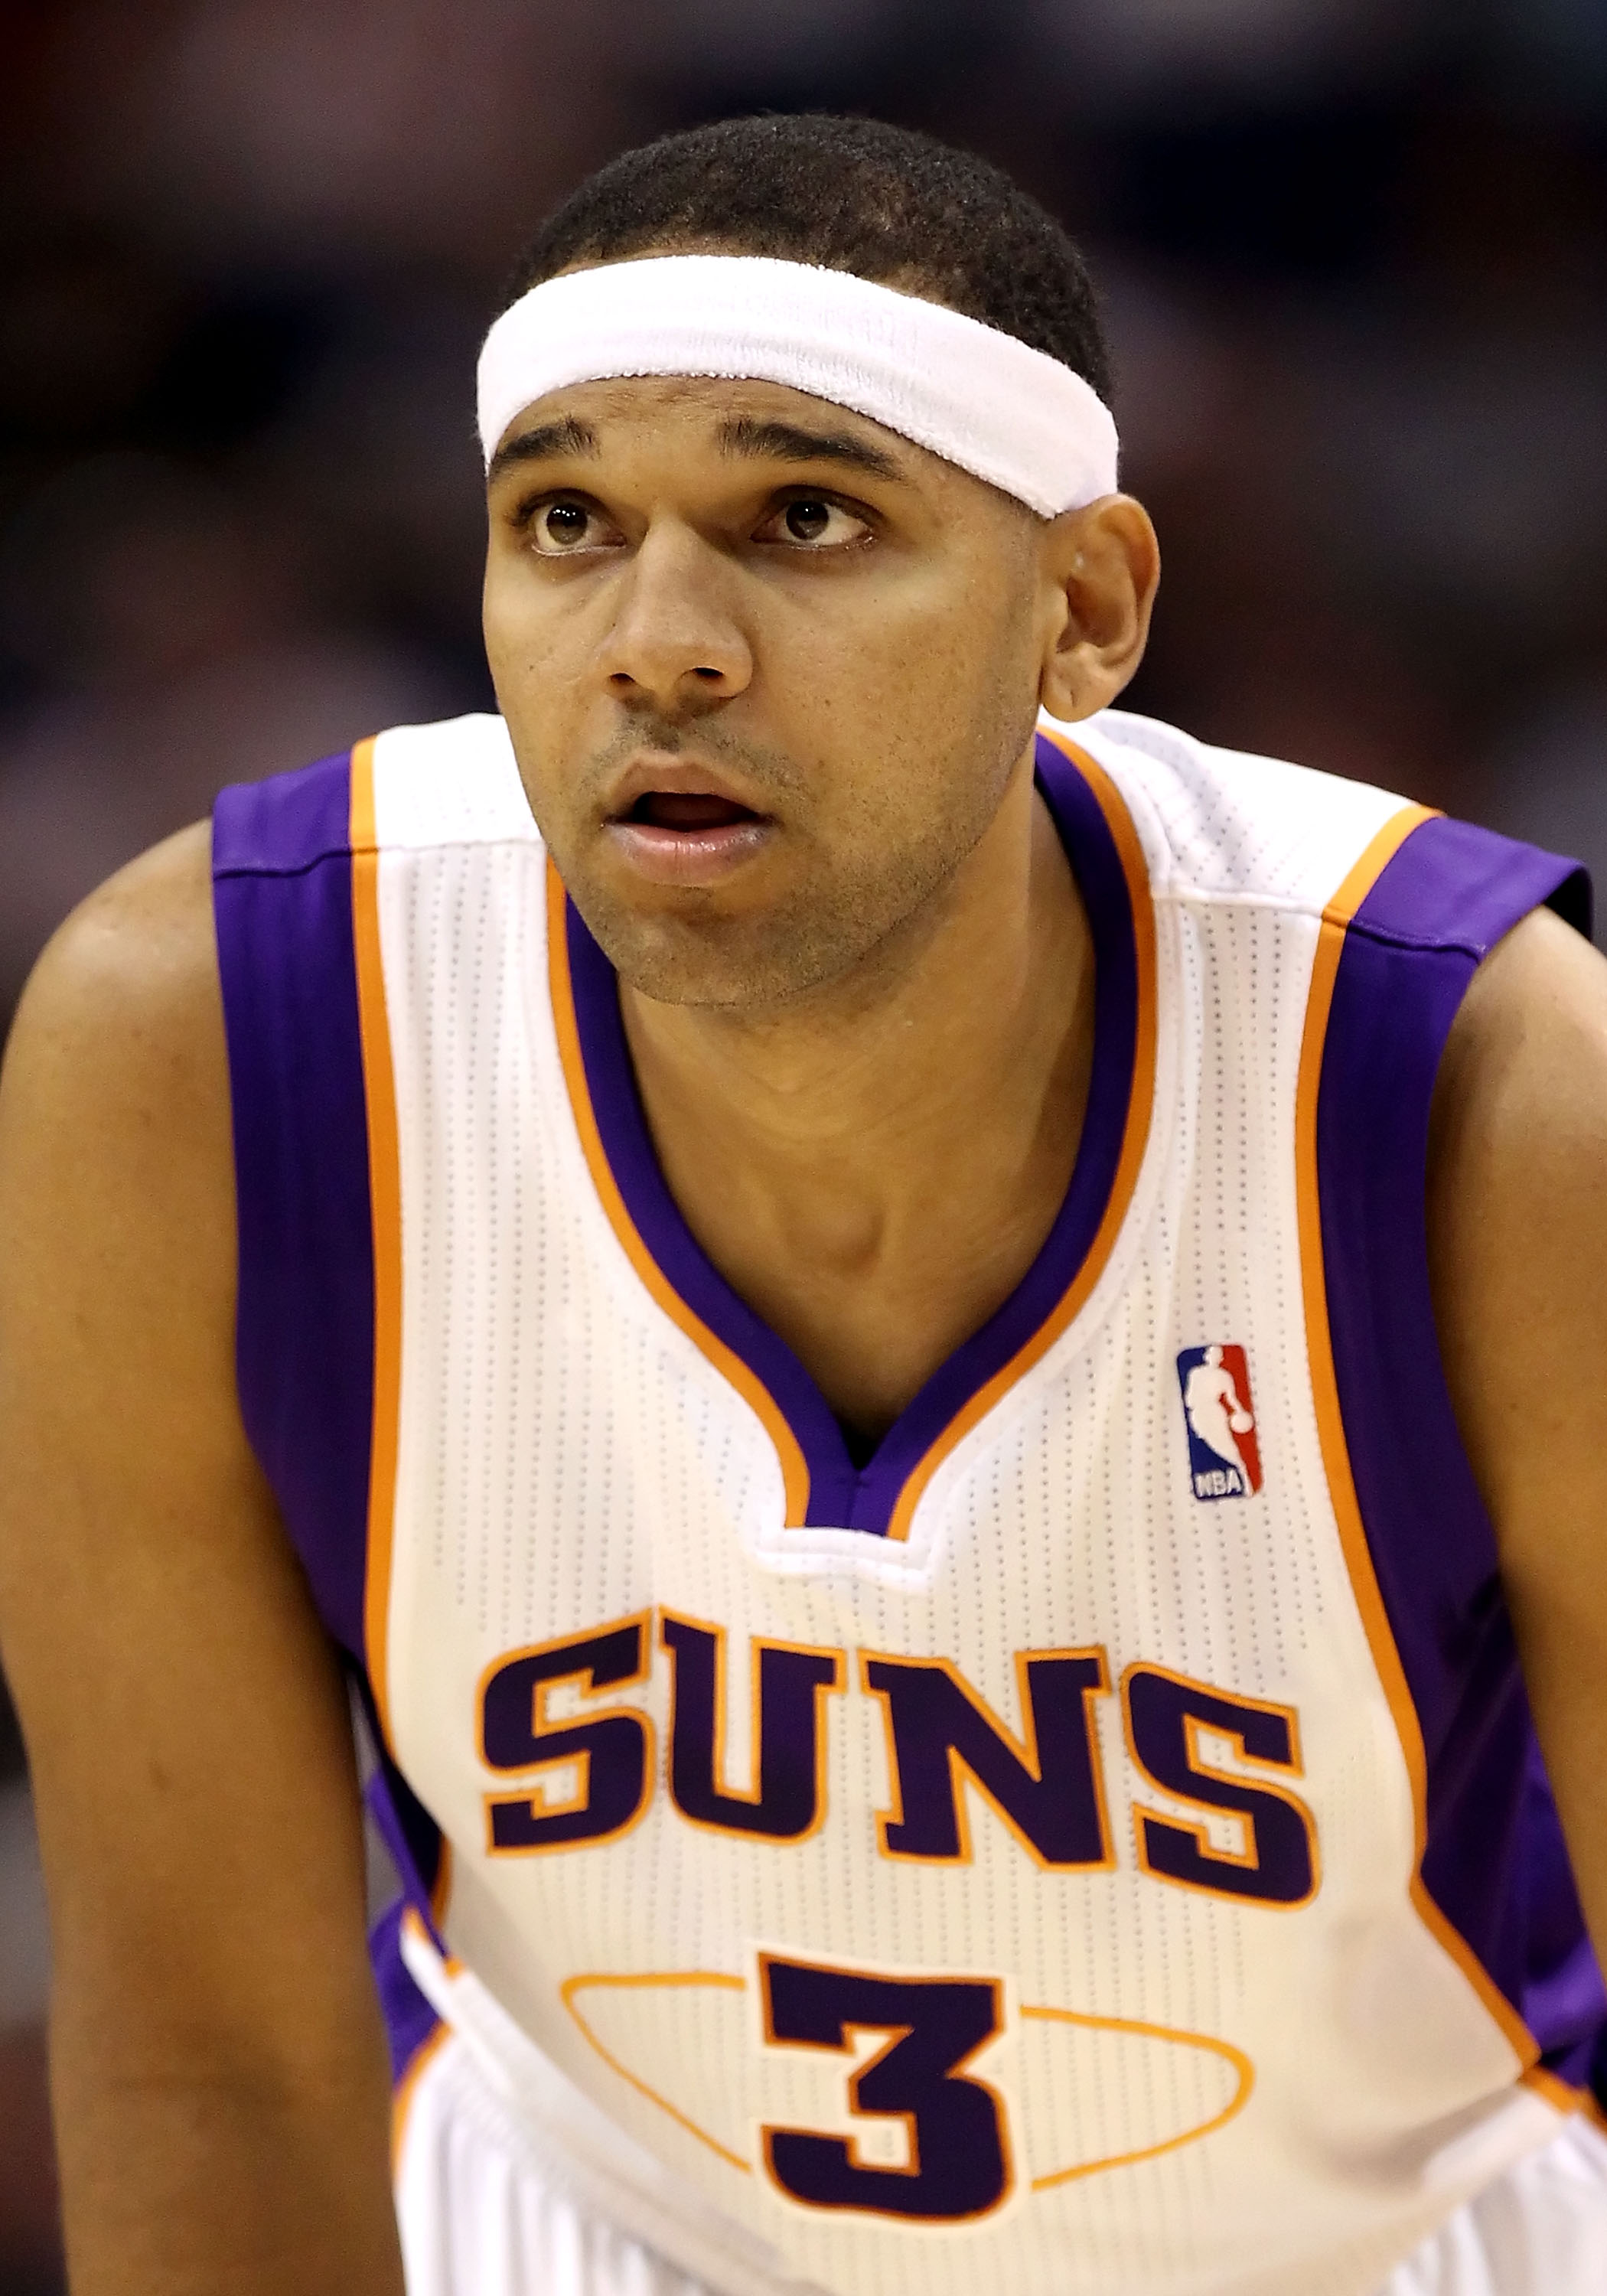 Phoenix Suns swingman Jared Dudley drives inside during the 2010 playoffs,  wearing a los Suns jersey.